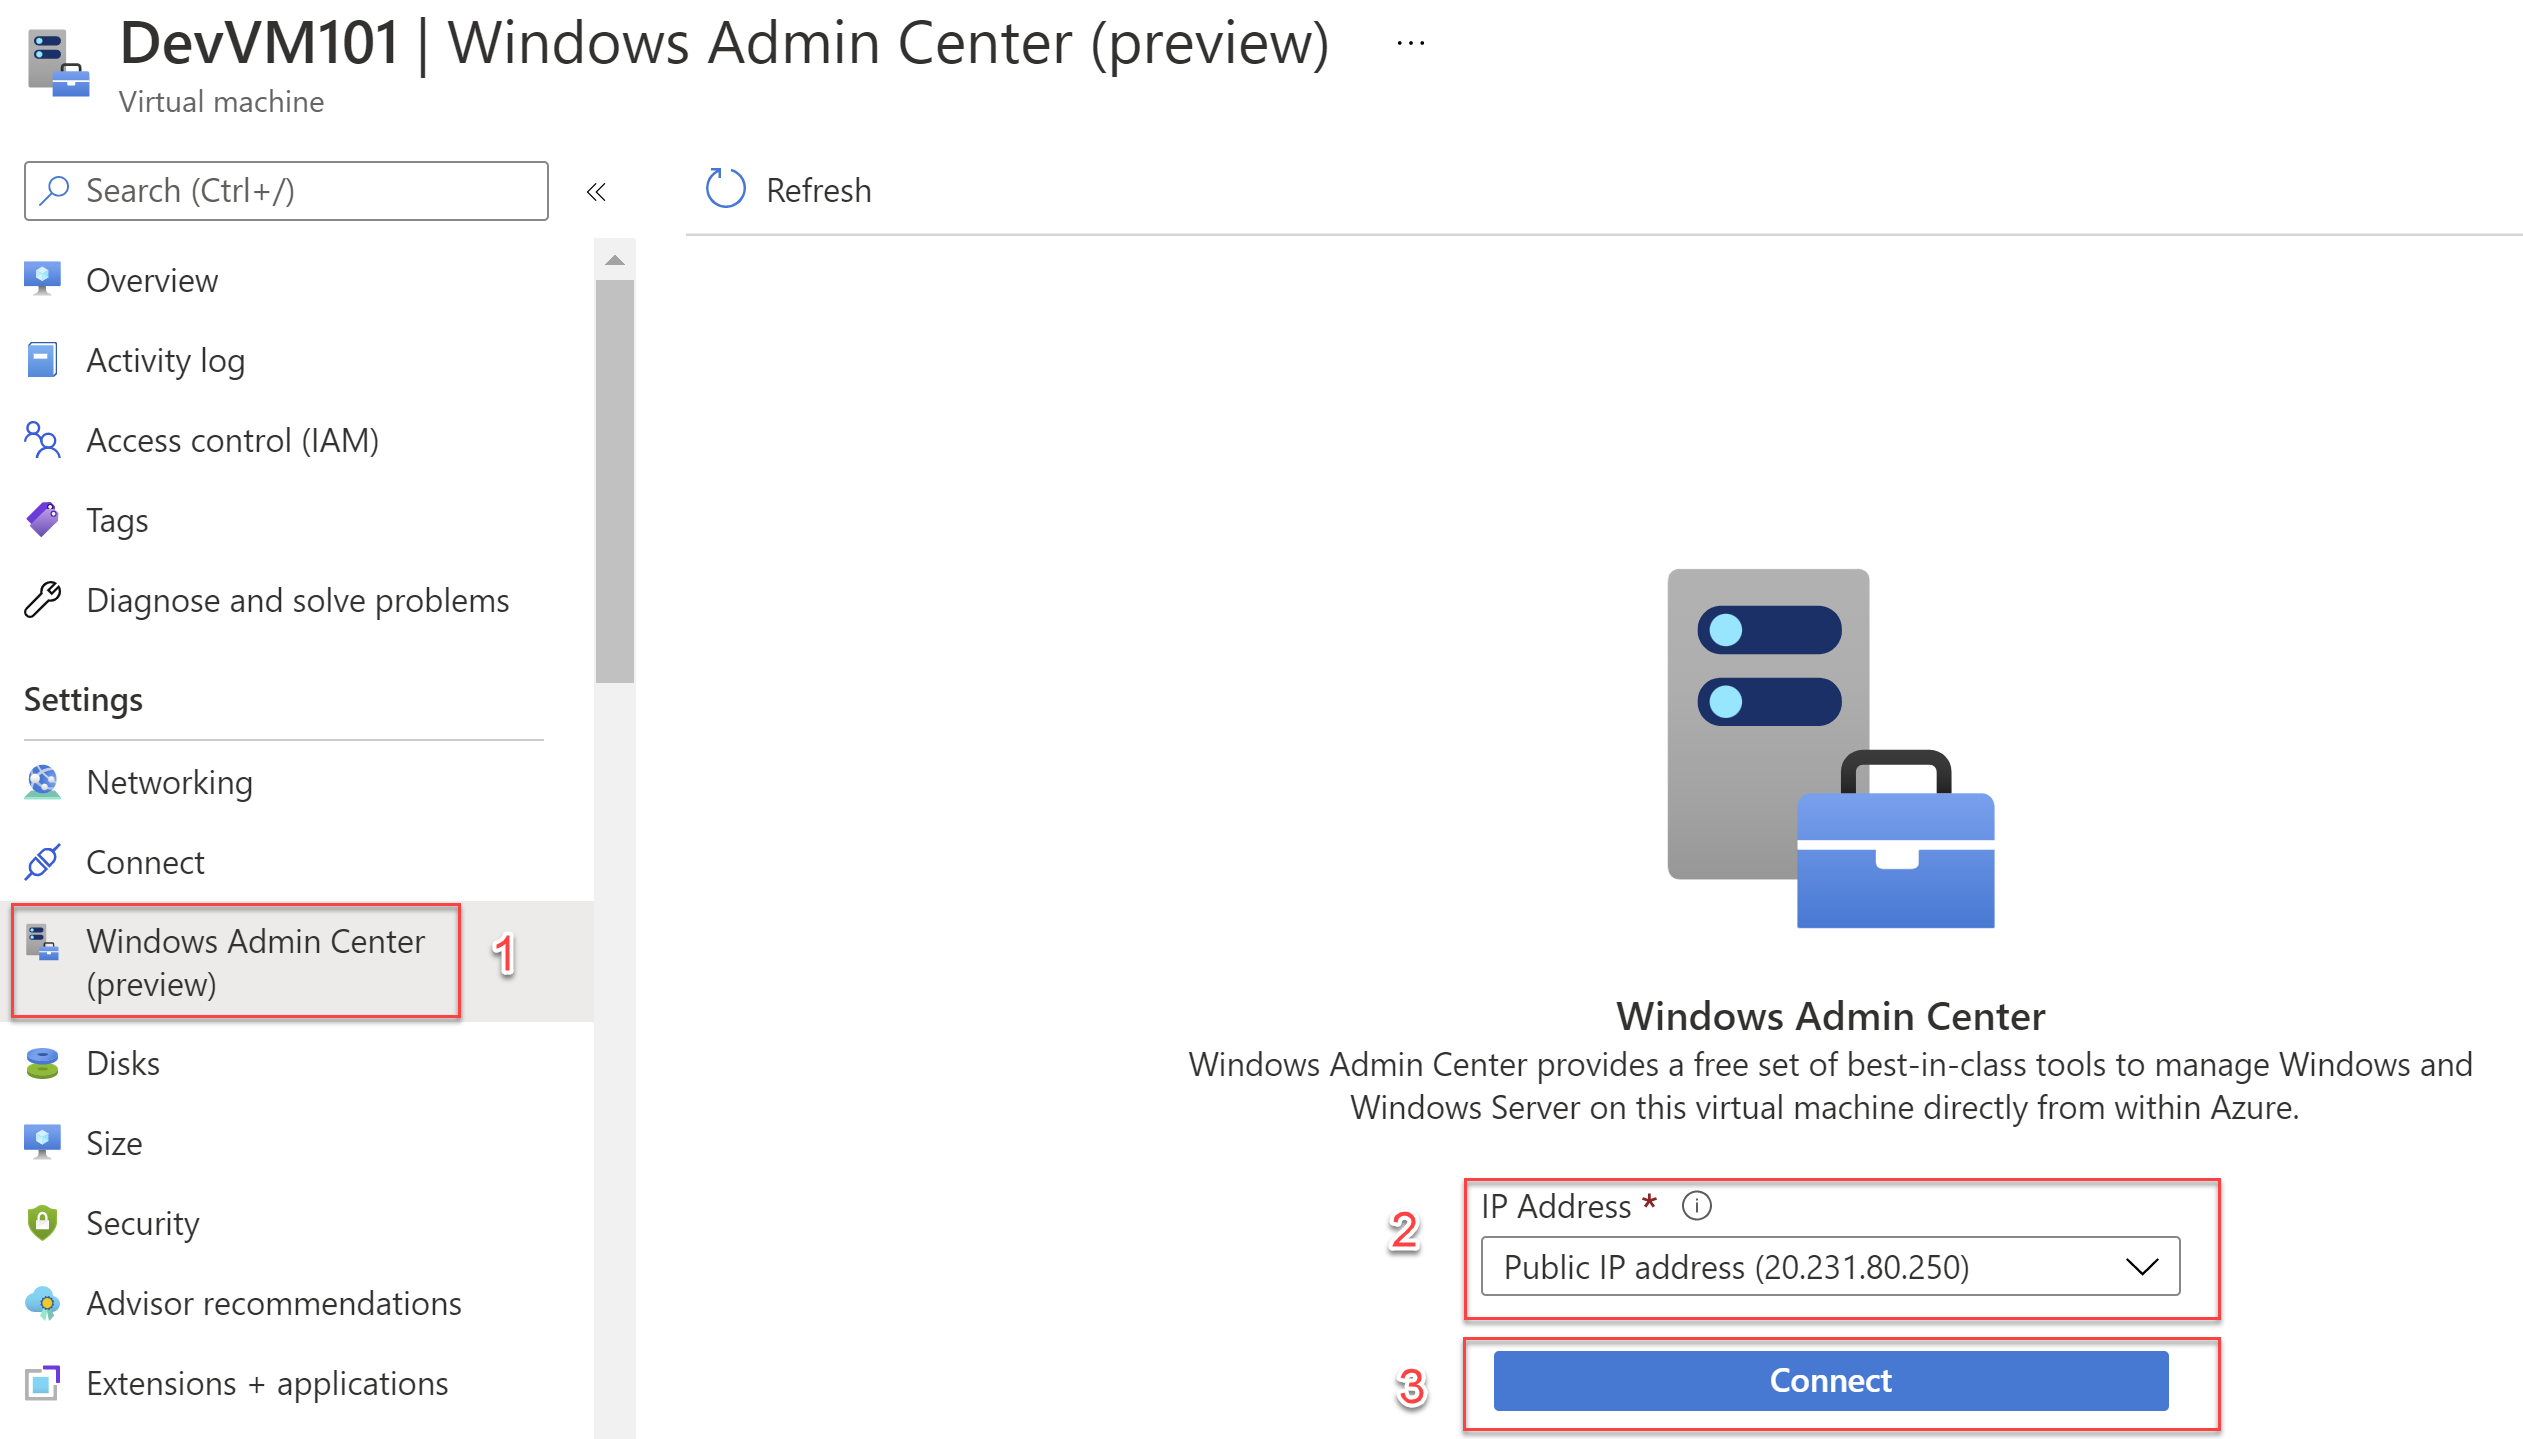 Connect to Windows Admin Center